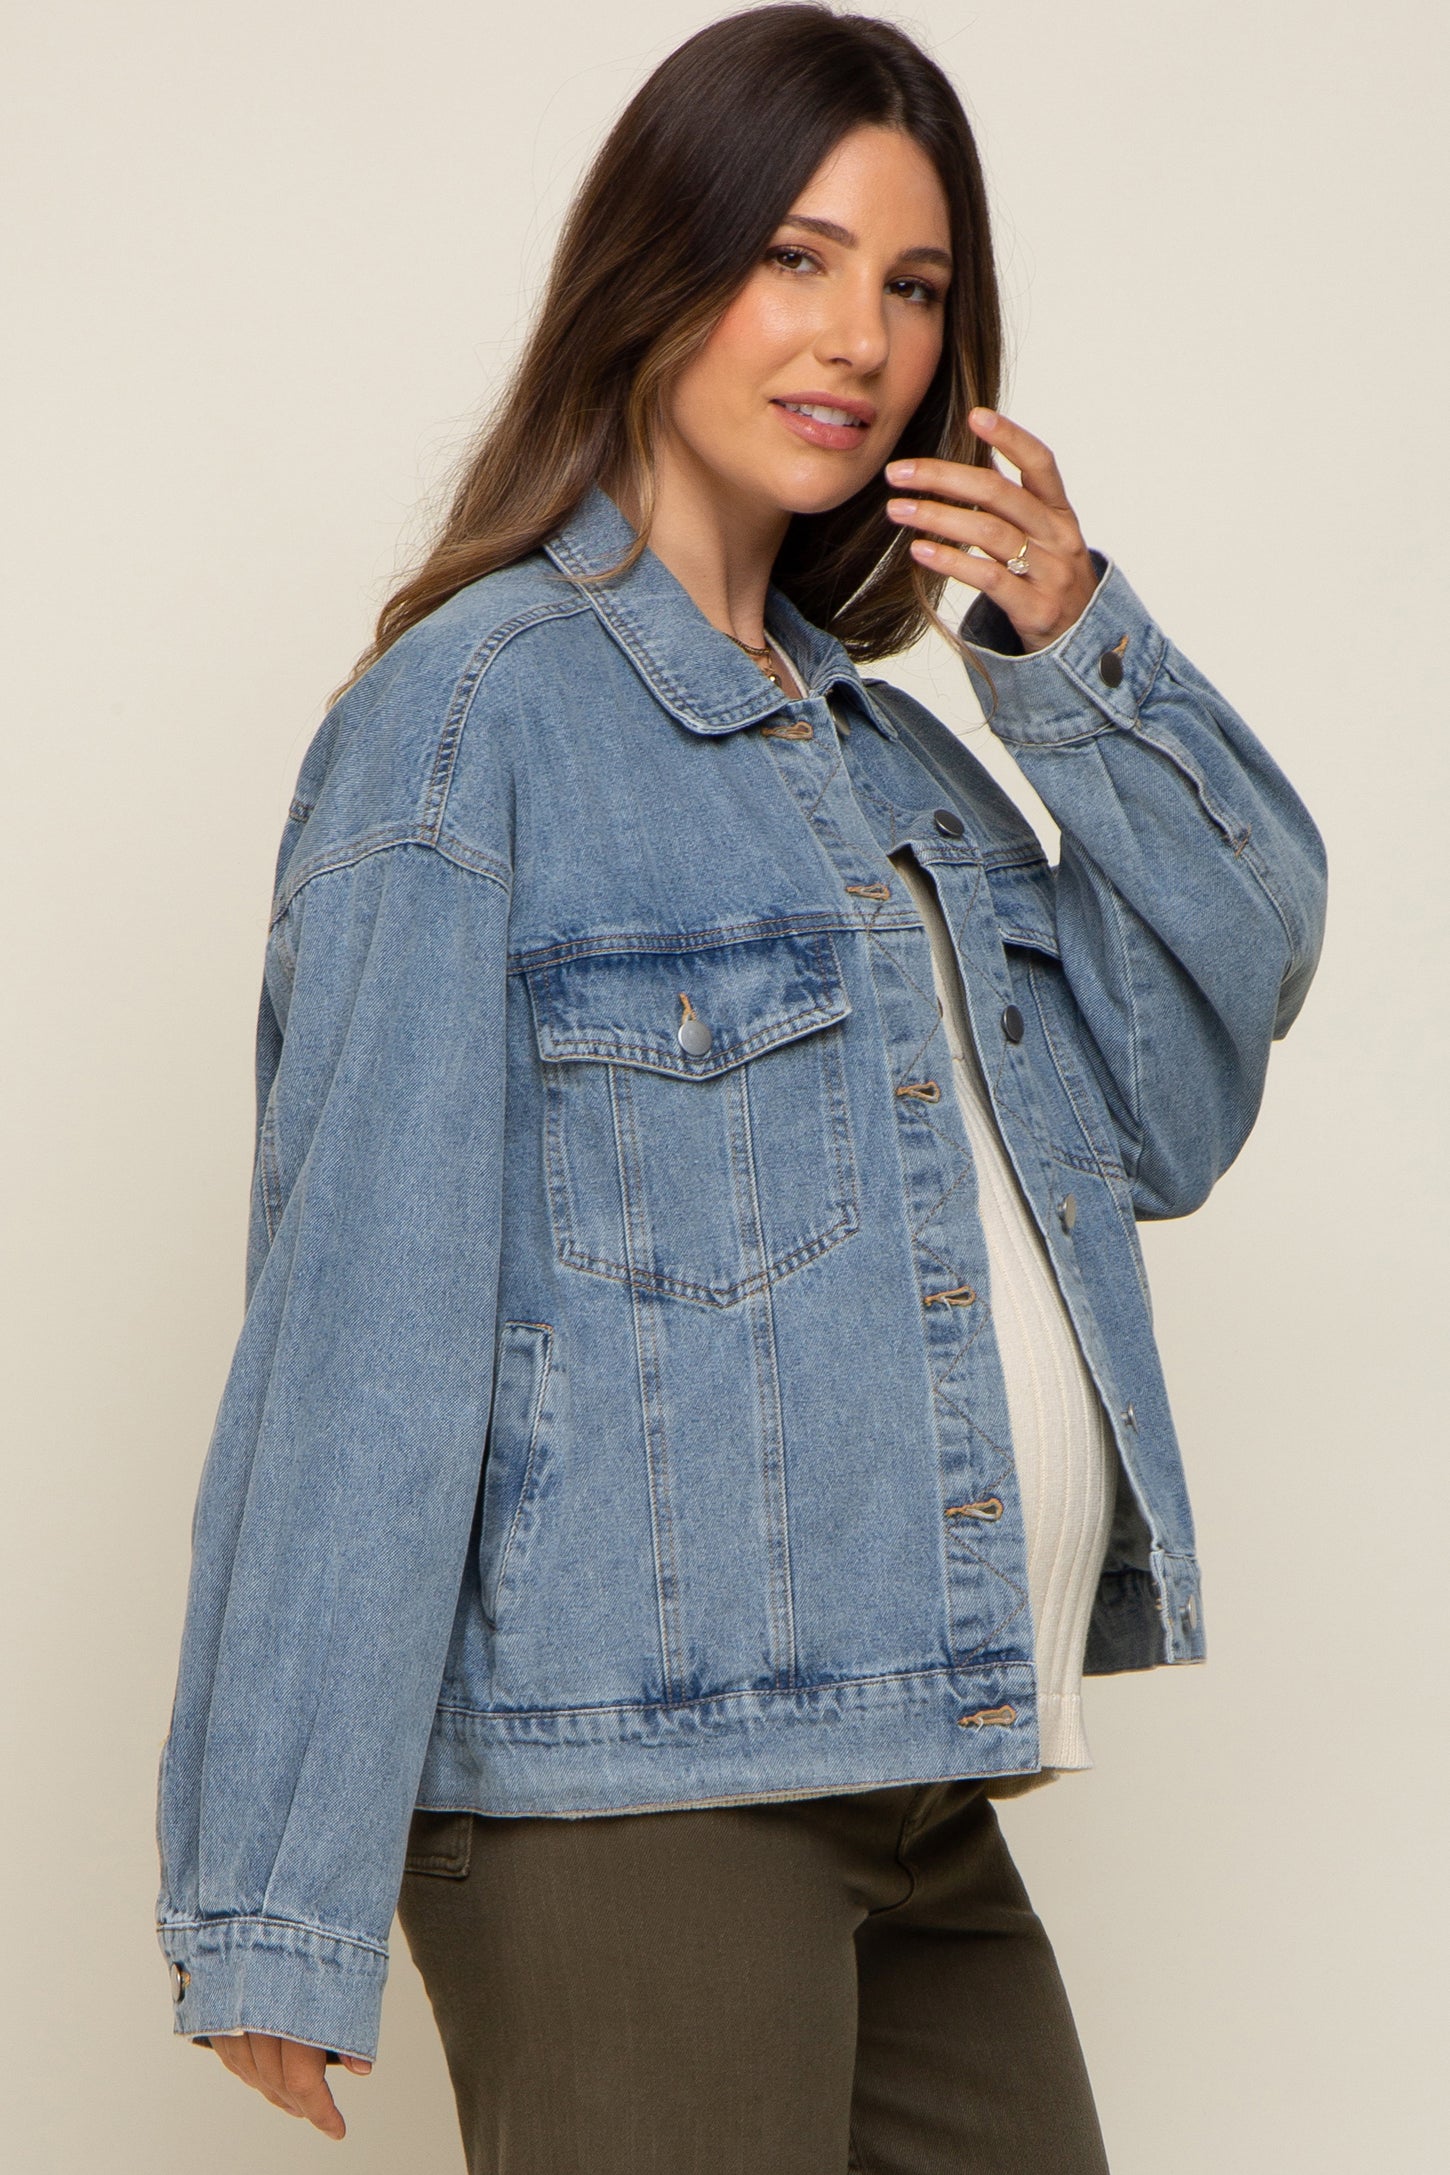 Cherry blossom Blooms | Oversized Denim Jacket - Pink – Yes, Grace Boutique